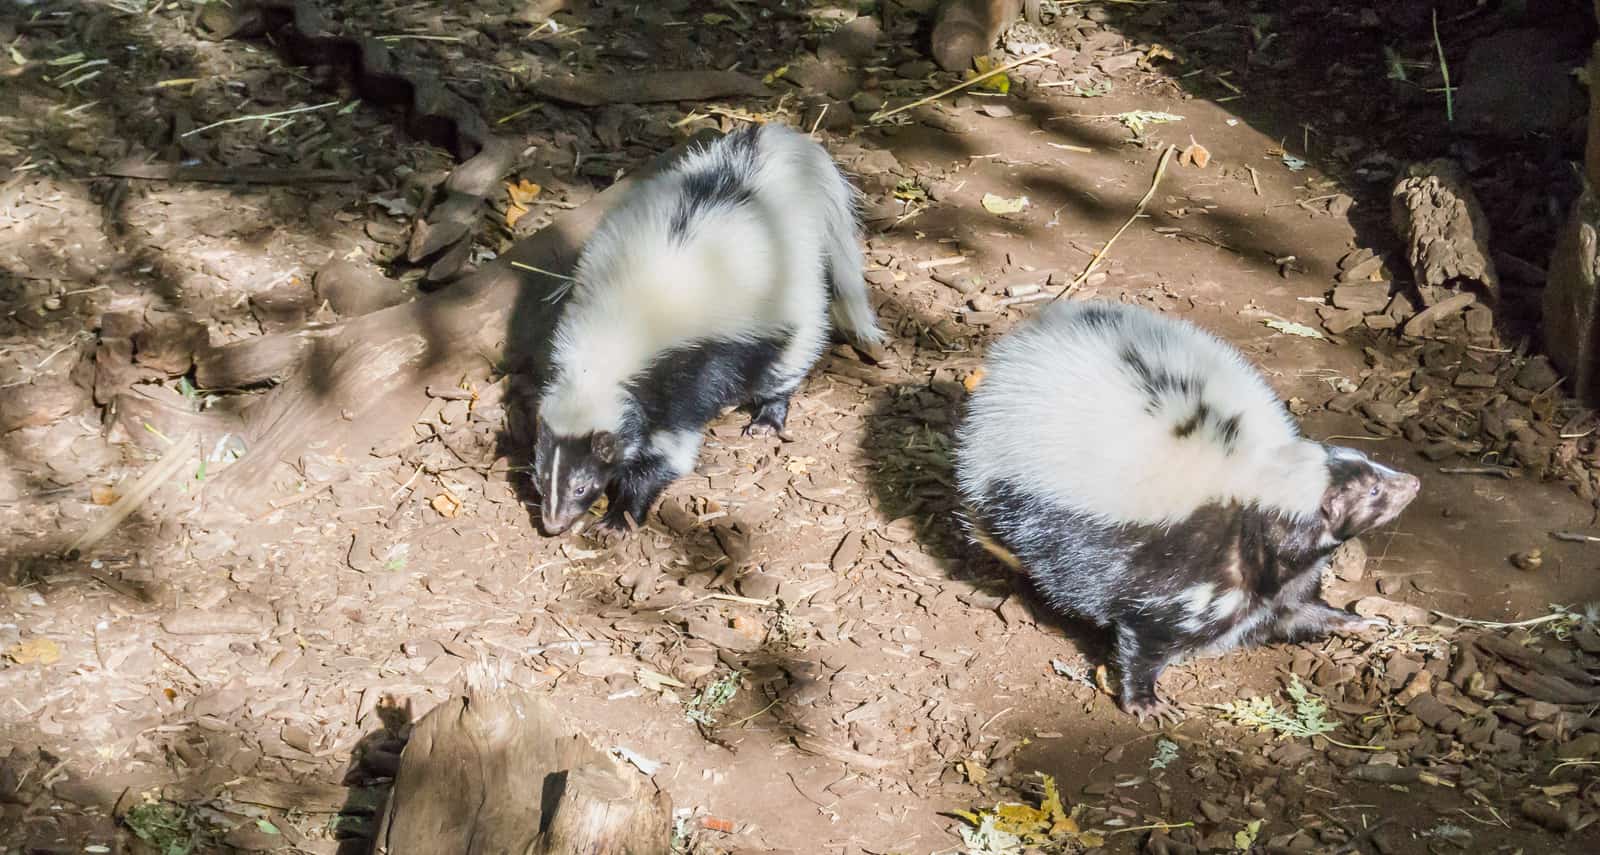 a two black and white striped skunks standing together hunting for food